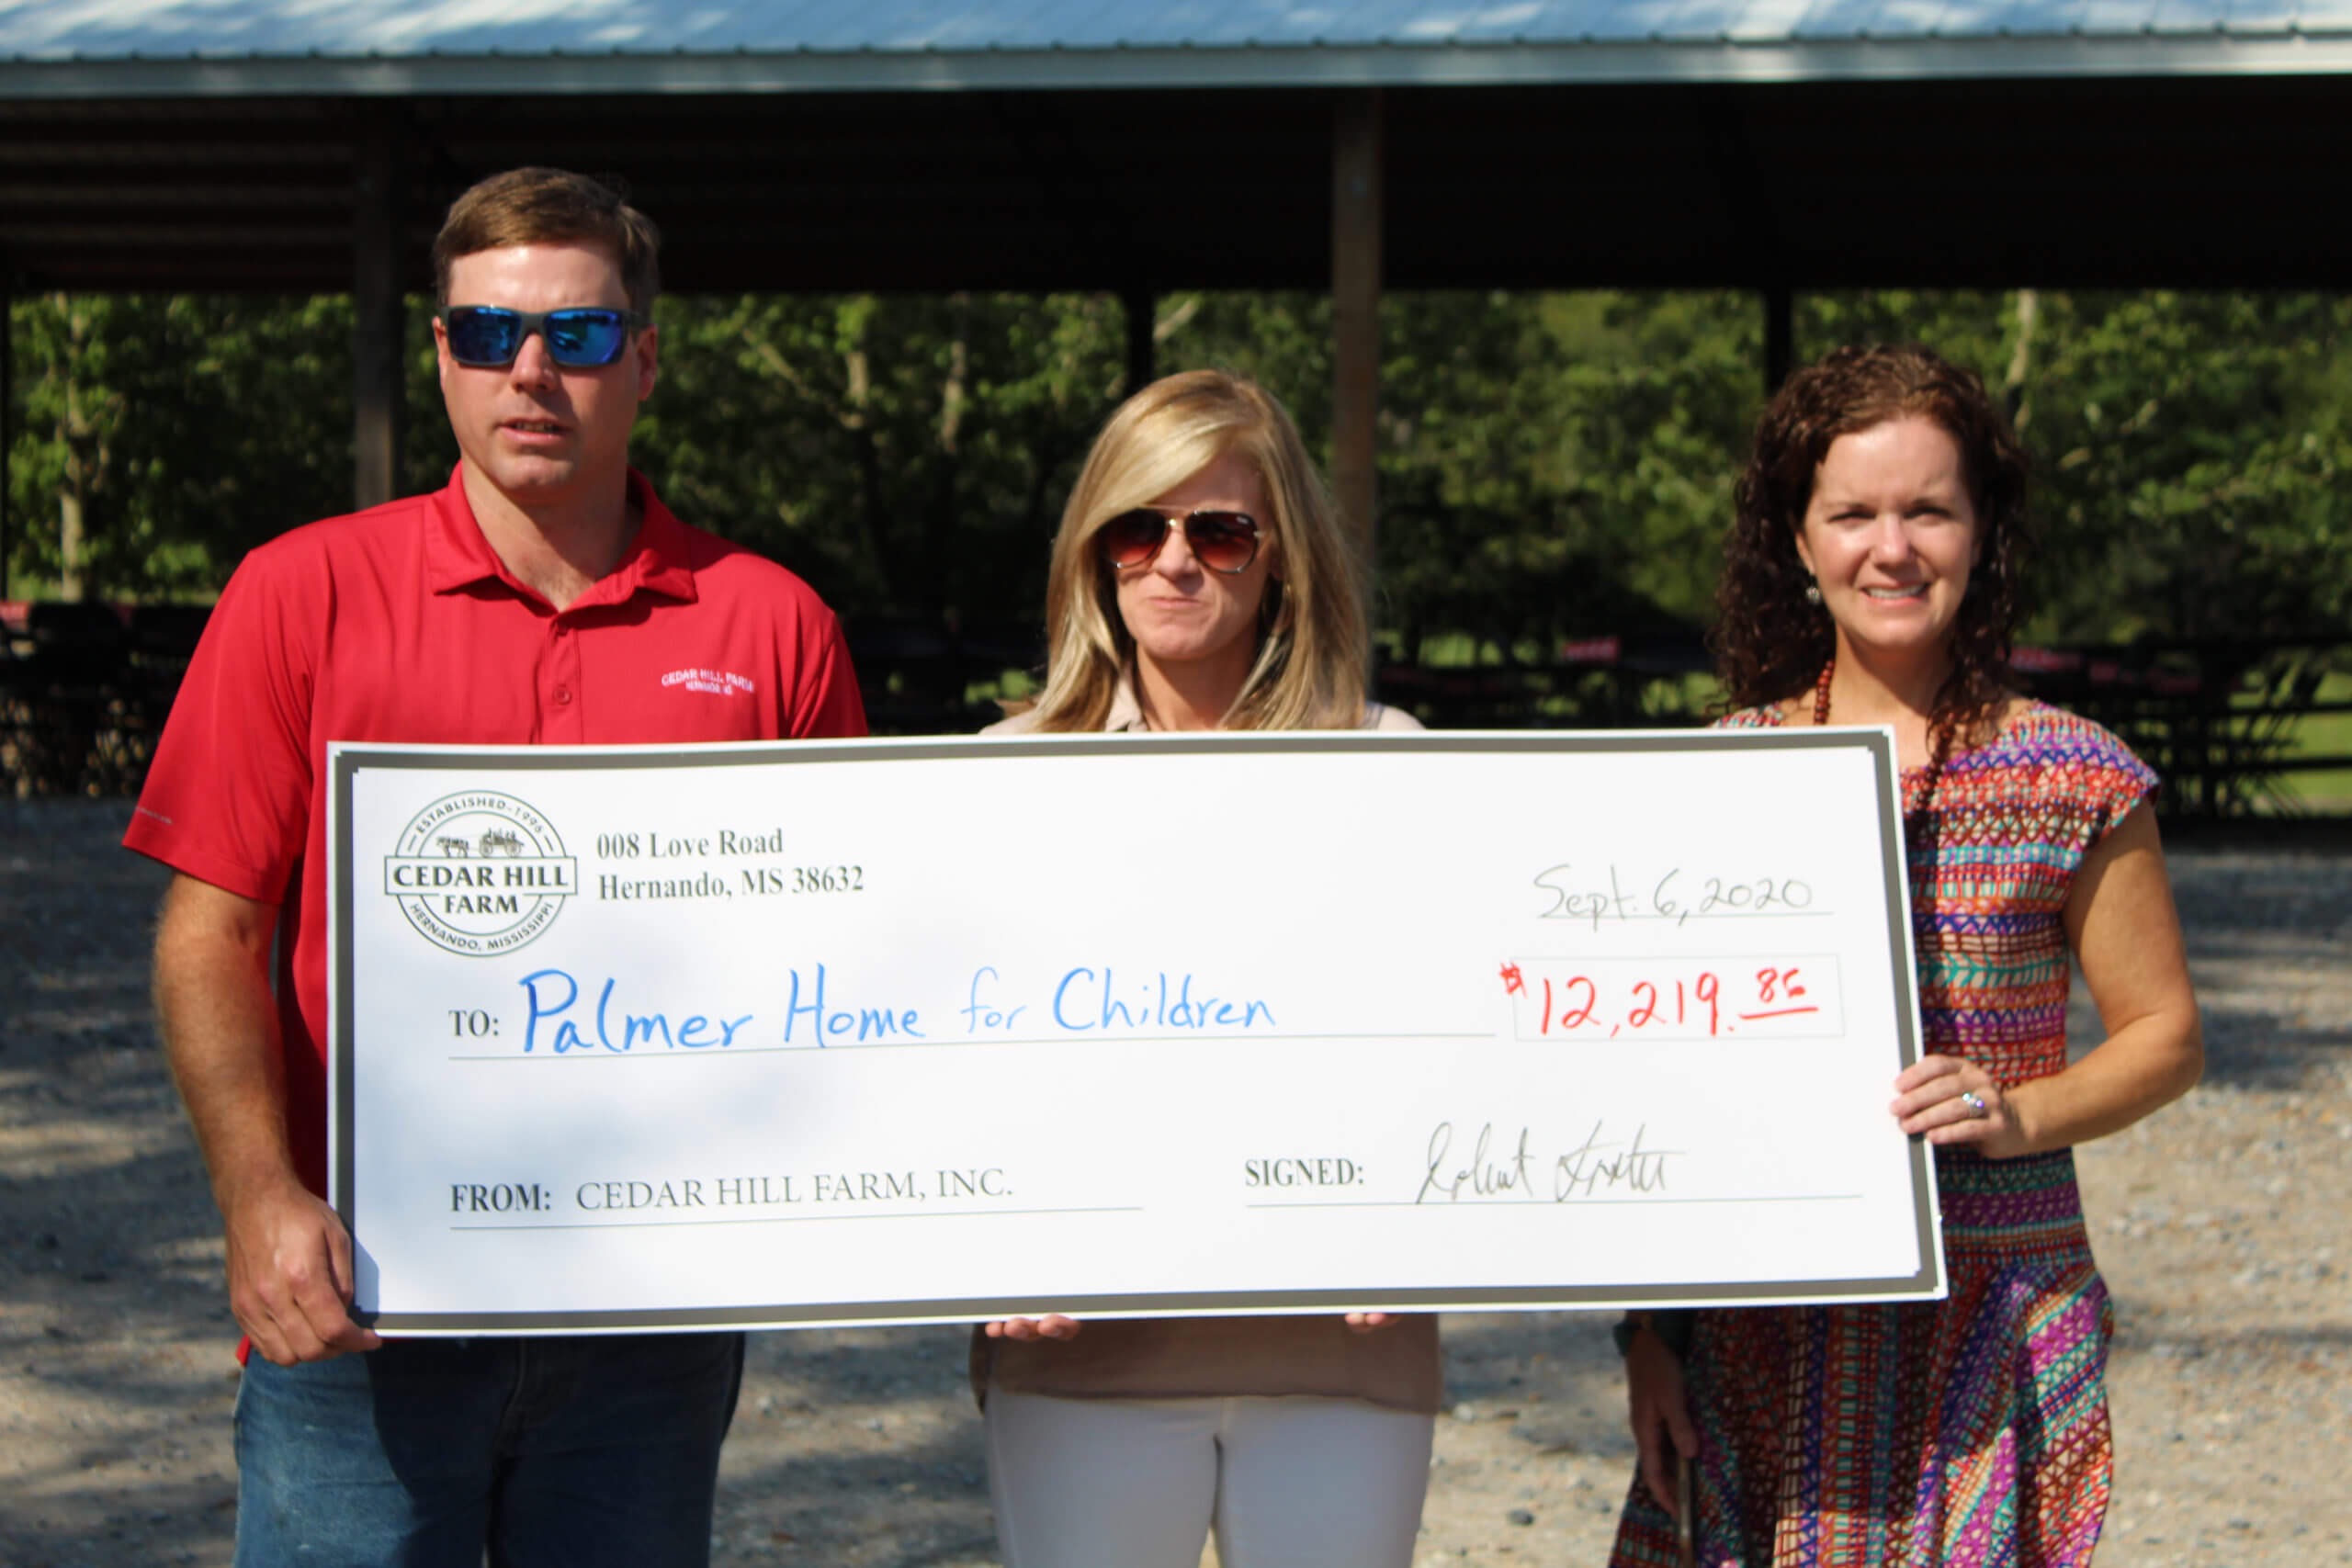 Fireworks on the Farm donates to Palmer Home for Children